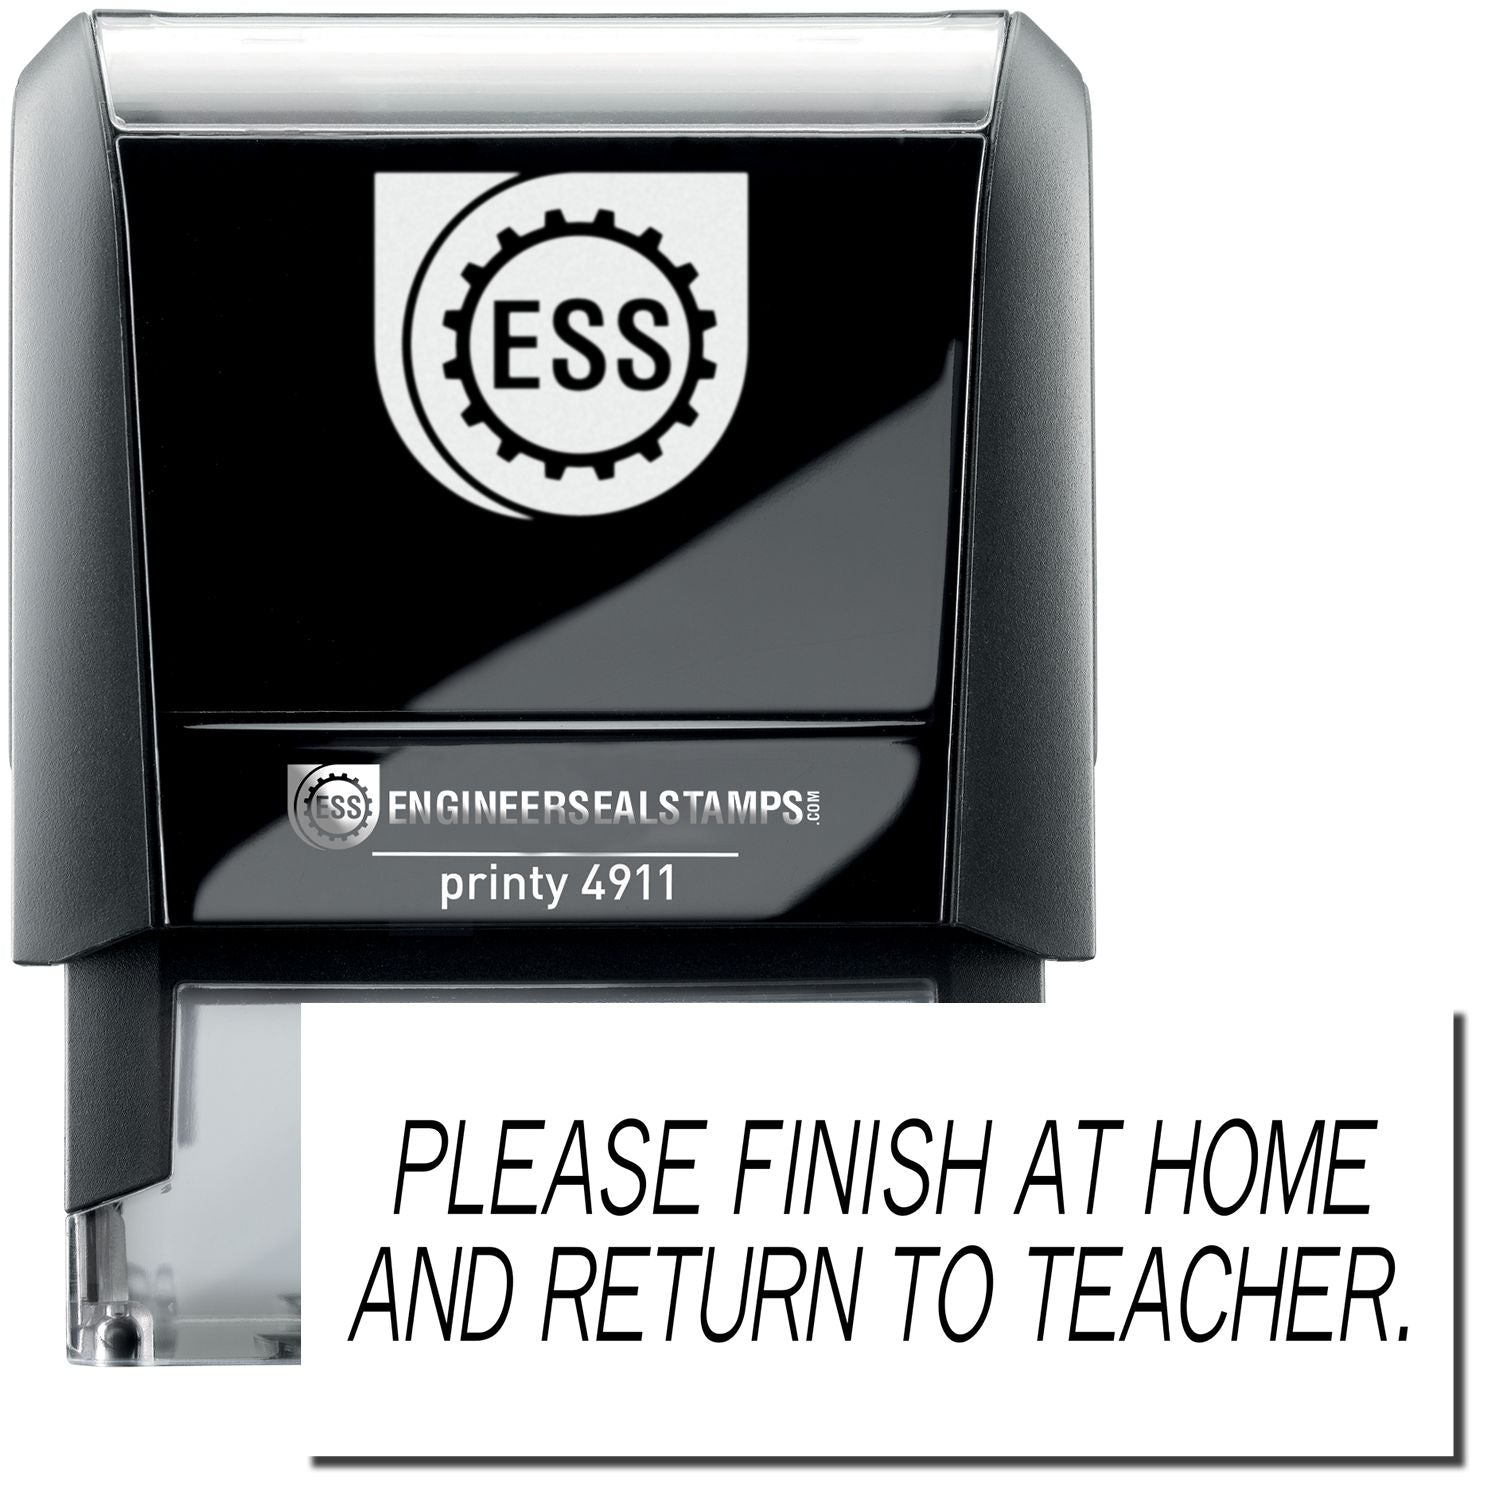 A self-inking stamp with a stamped image showing how the text "PLEASE FINISH AT HOME AND RETURN TO TEACHER." is displayed after stamping.